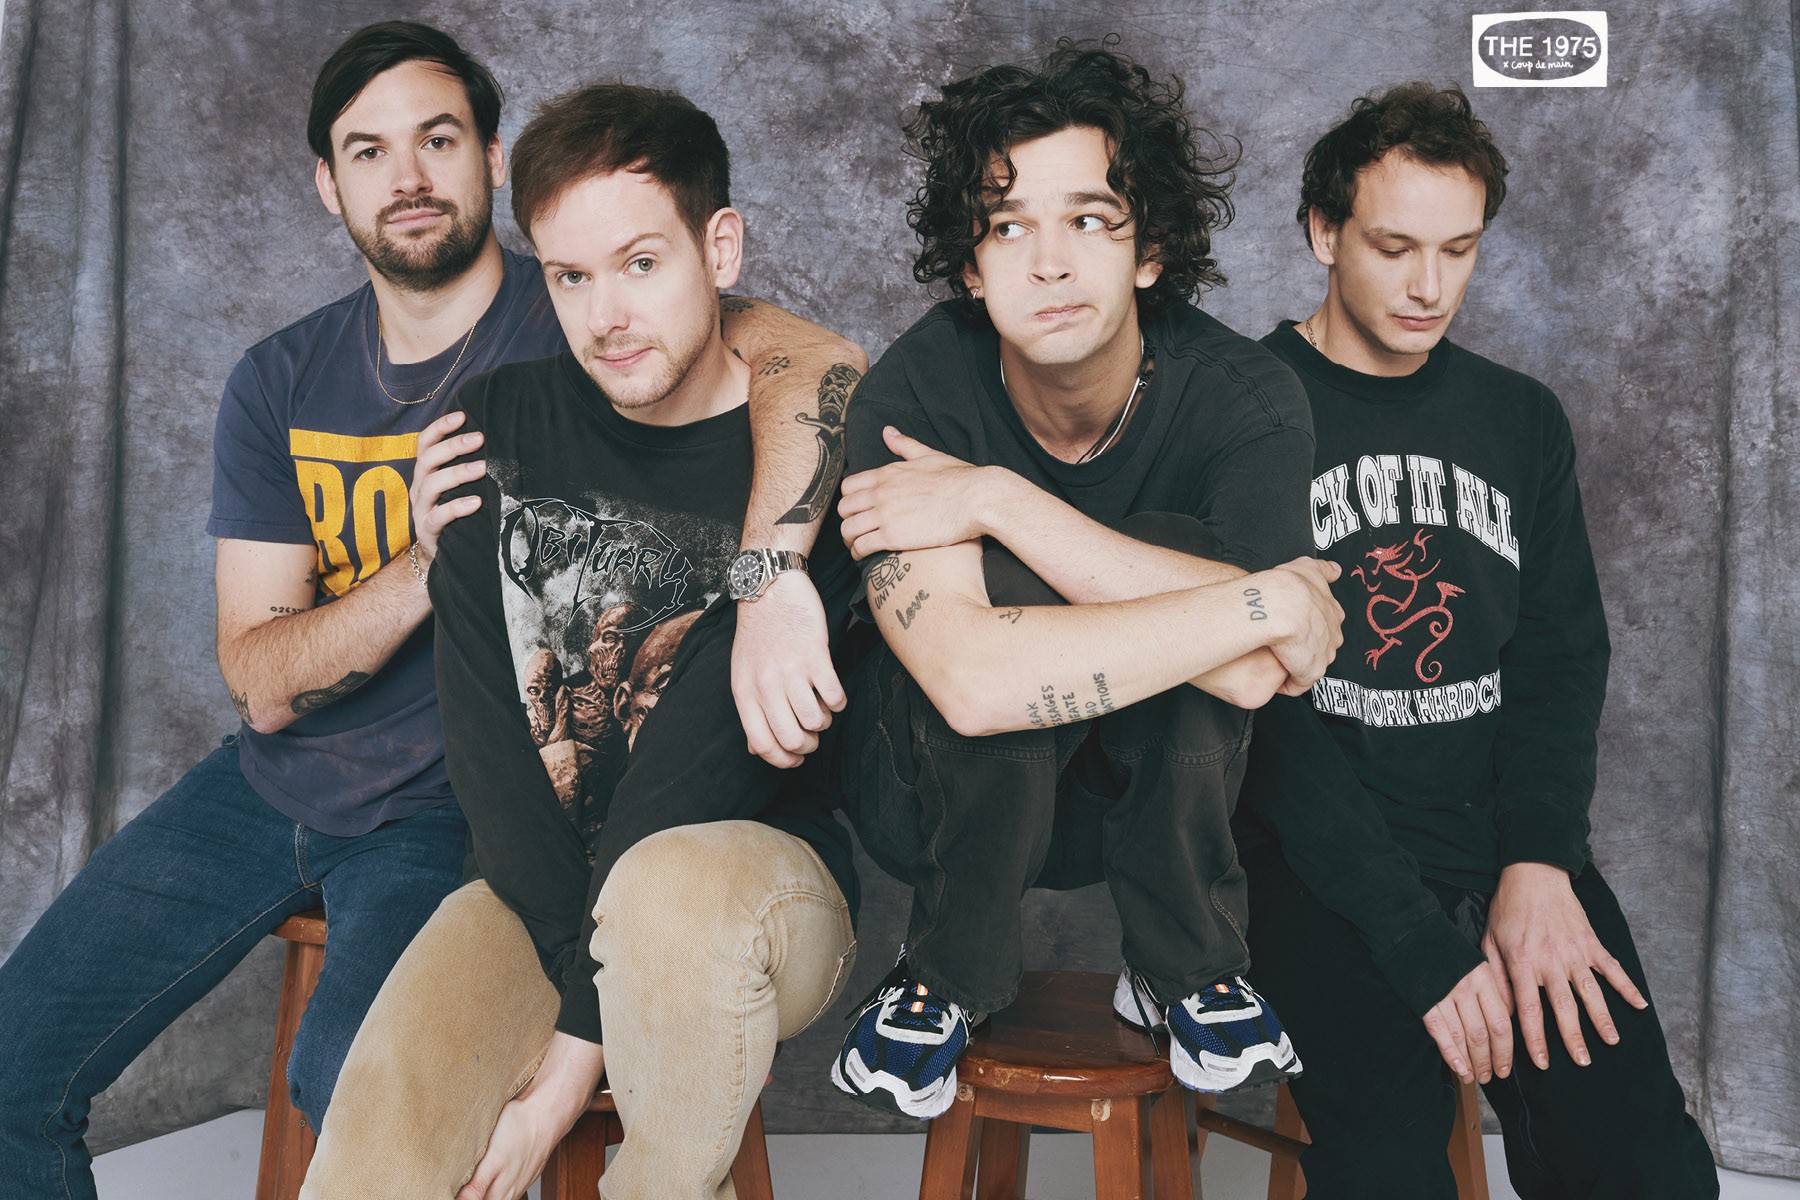 Interview: The 1975 - "Let's make things about purpose..."